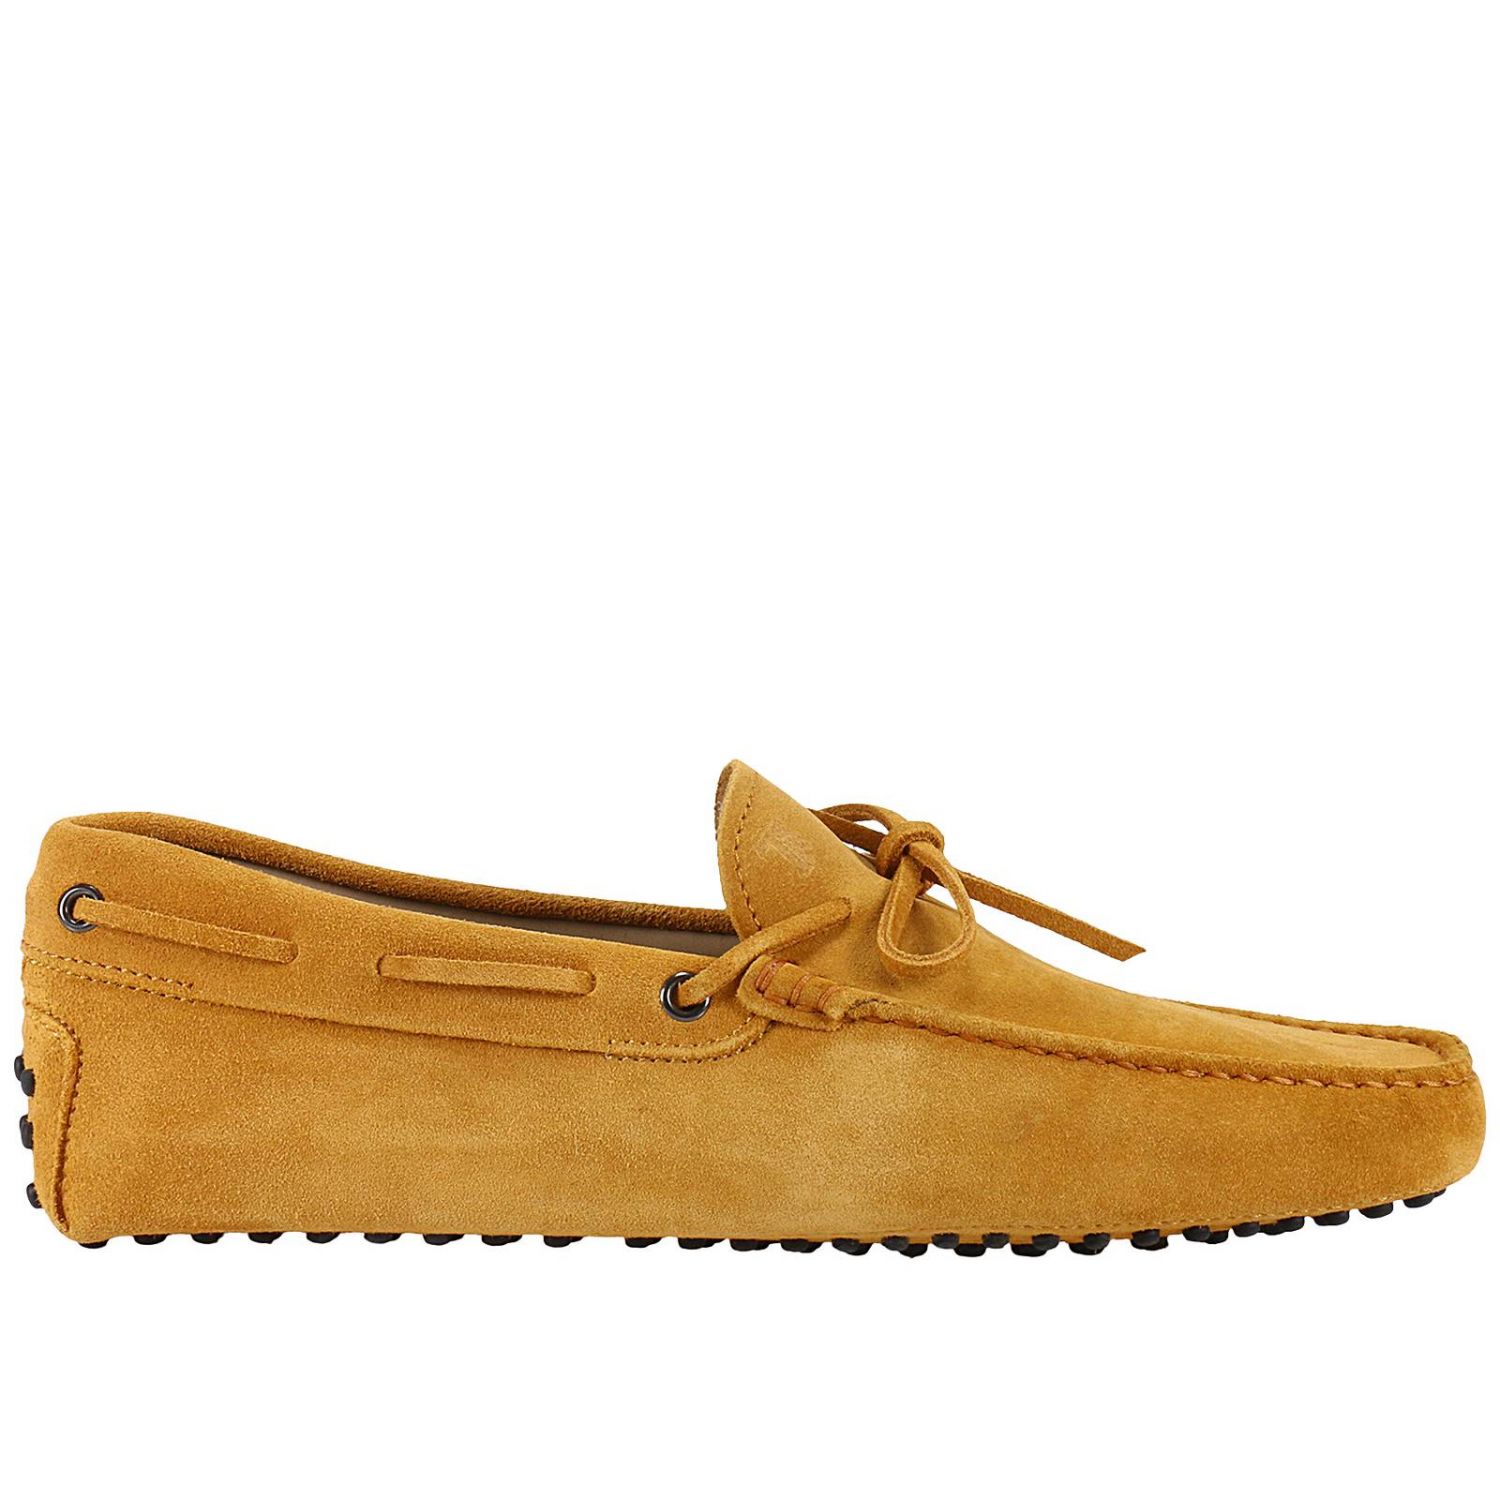 TODS: Shoes men Tod's | Loafers Tods Men Orange | Loafers Tods ...